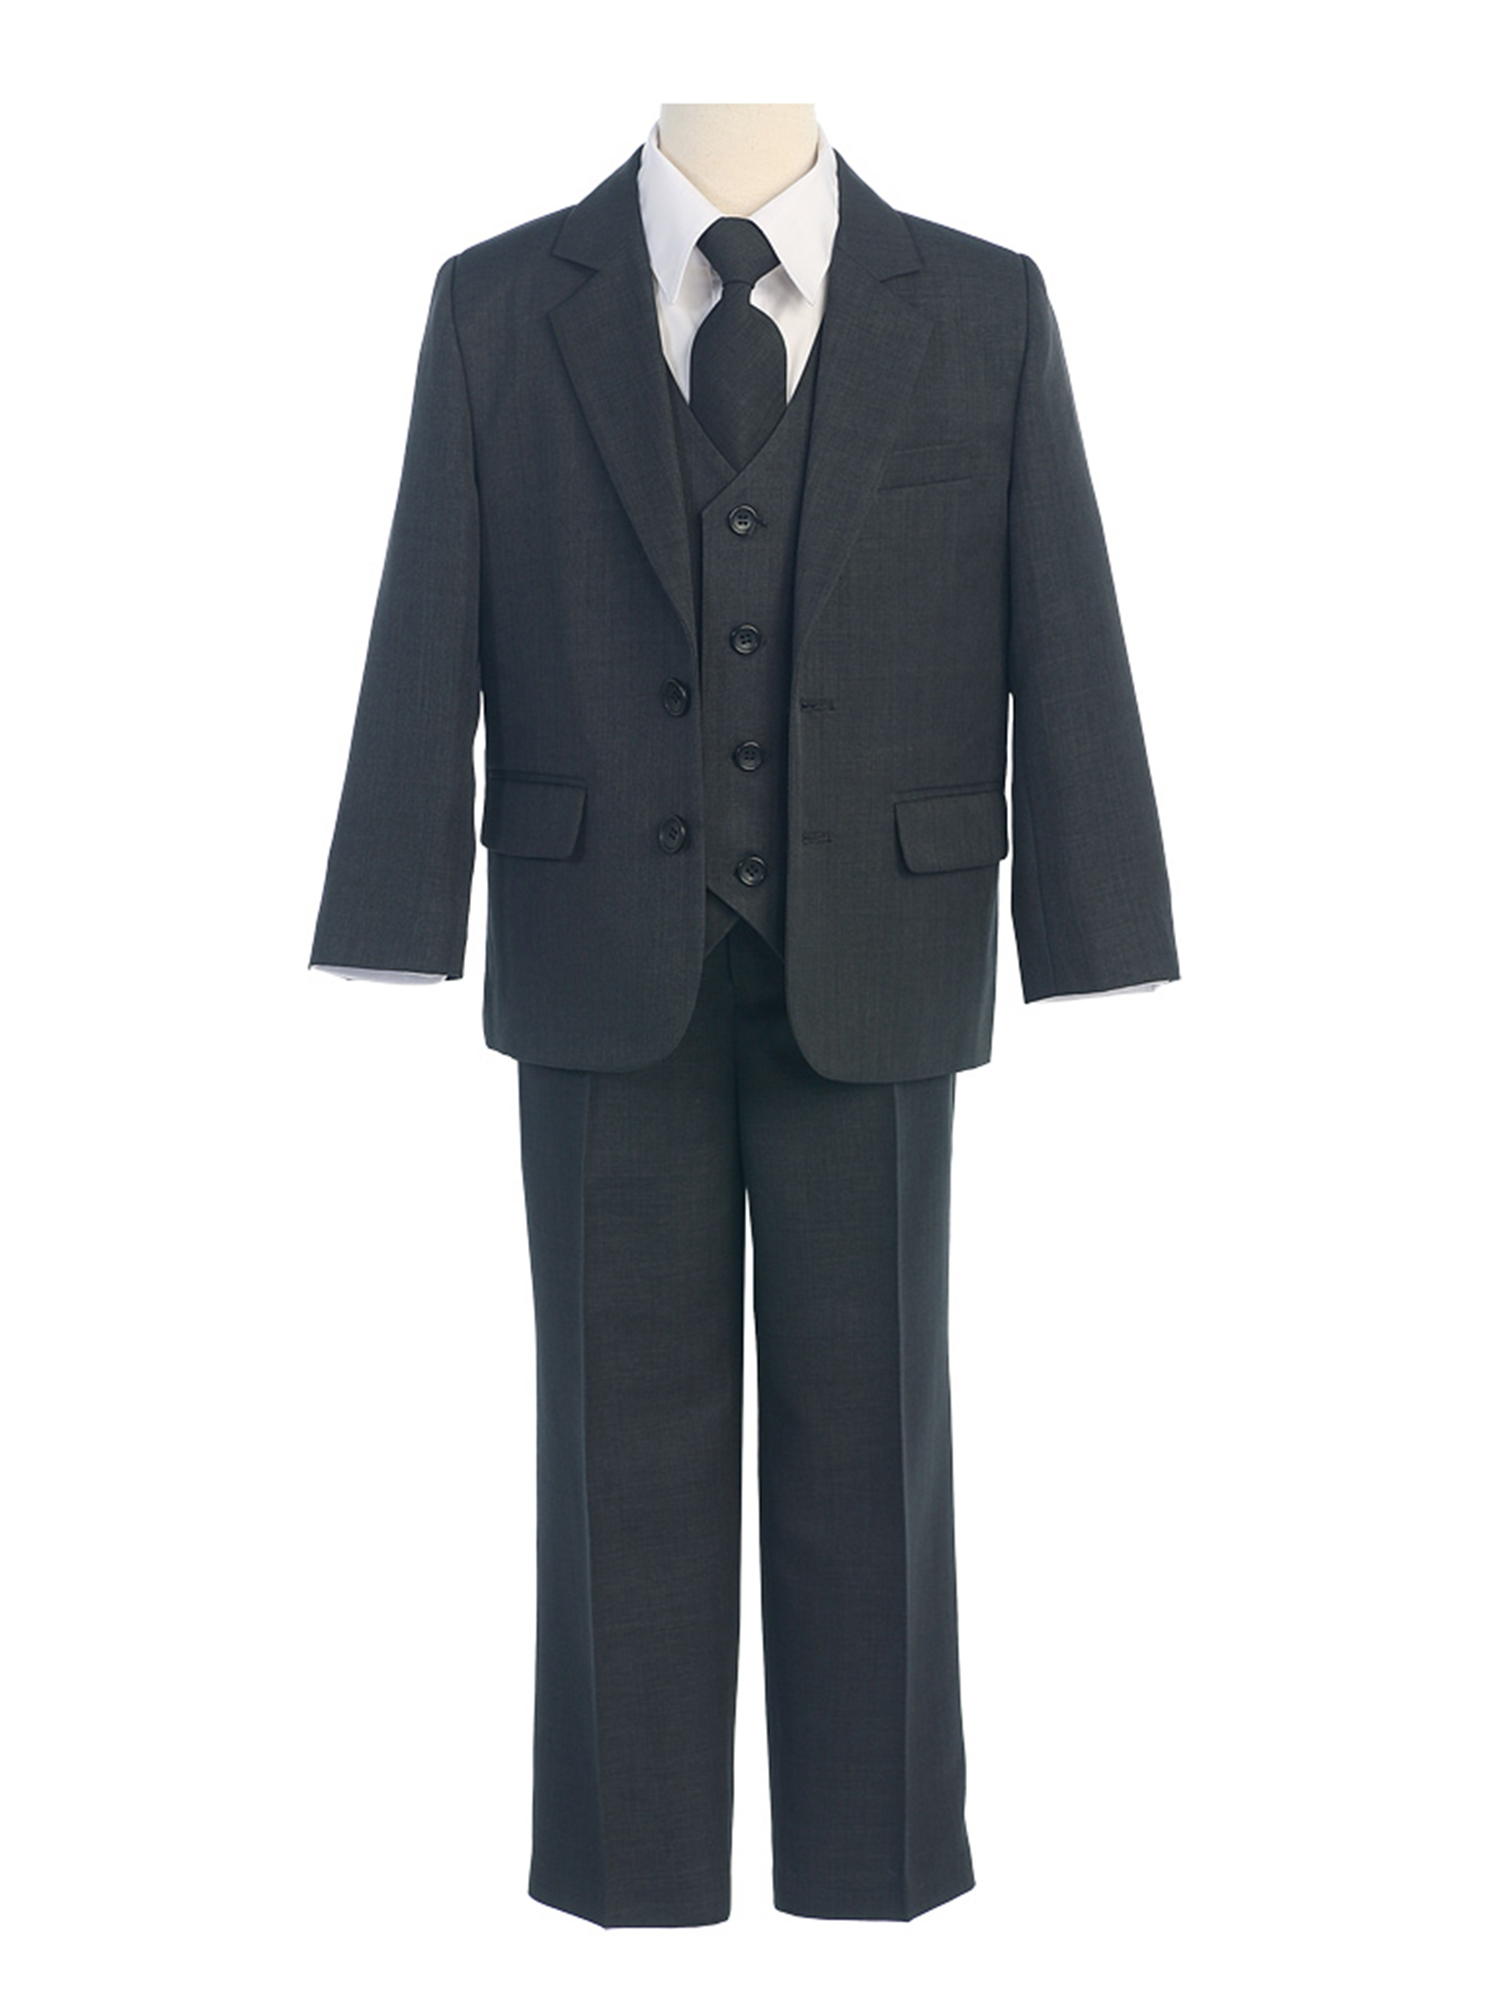 COLE Boys Suit with Shirt and Vest (5-Piece) - Charcoal Grey - Size 20